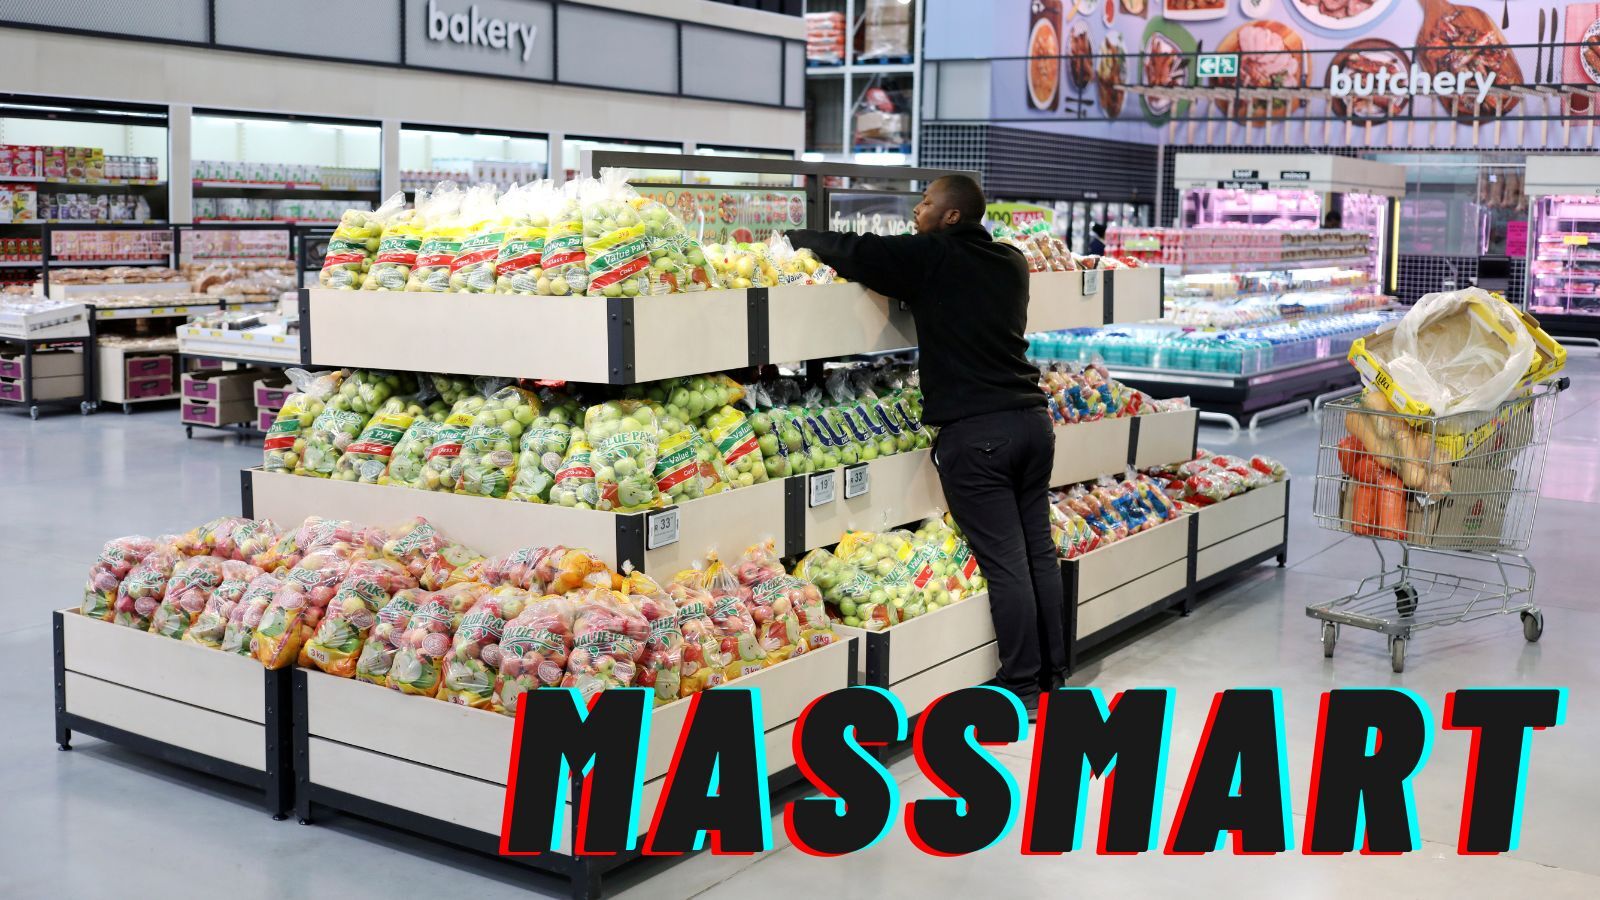 Massmart: Development History, Equity Changes, and More...